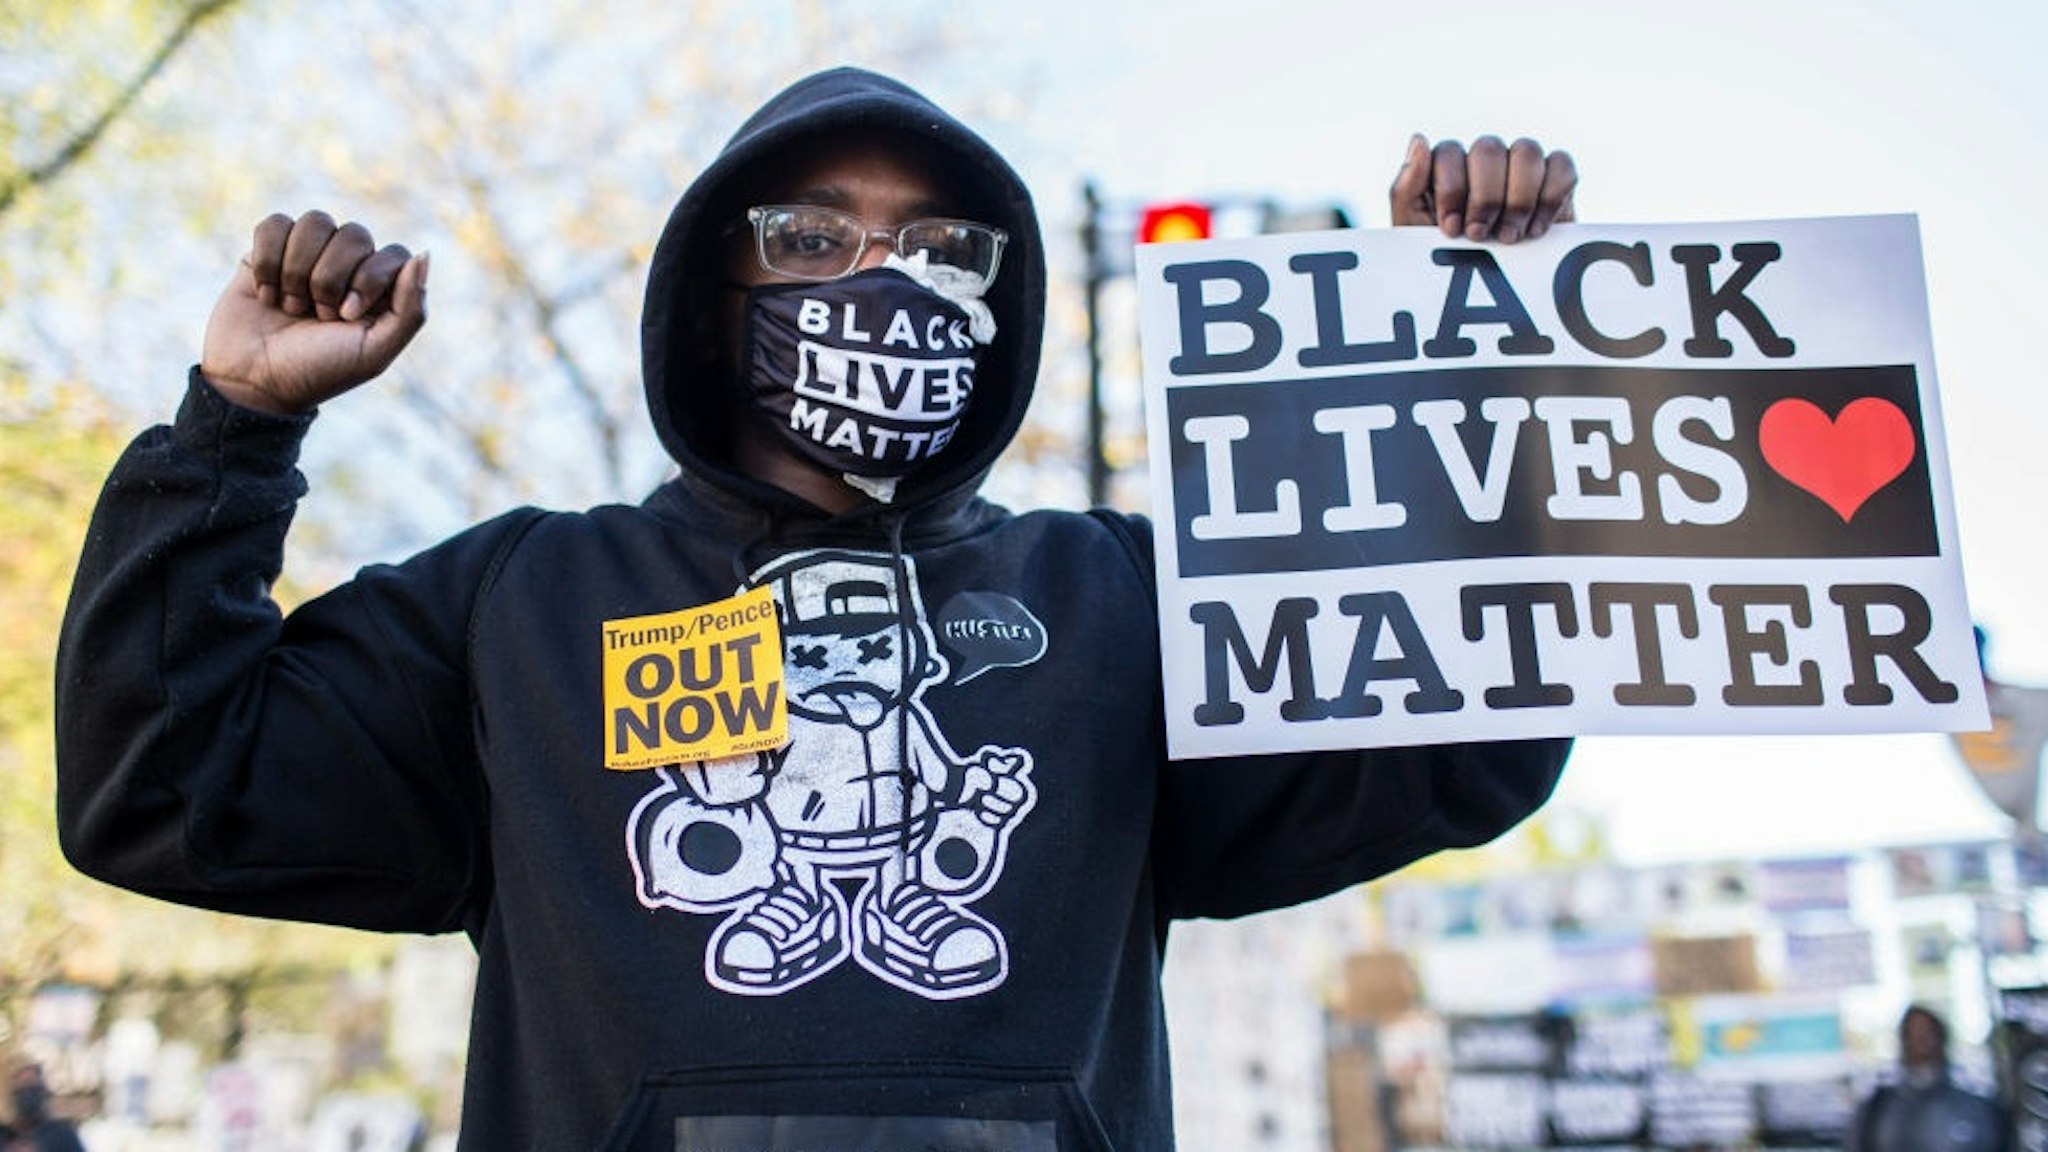 WASHINGTON, DISTRICT OF COLUMBIA, UNITED STATES - 2020/11/04: A protestor holding a sign with Black Lives Matter written on it, stands at Black Lives Matter Plaza near the White House while waiting for the final result of the 2020 Presidential election.